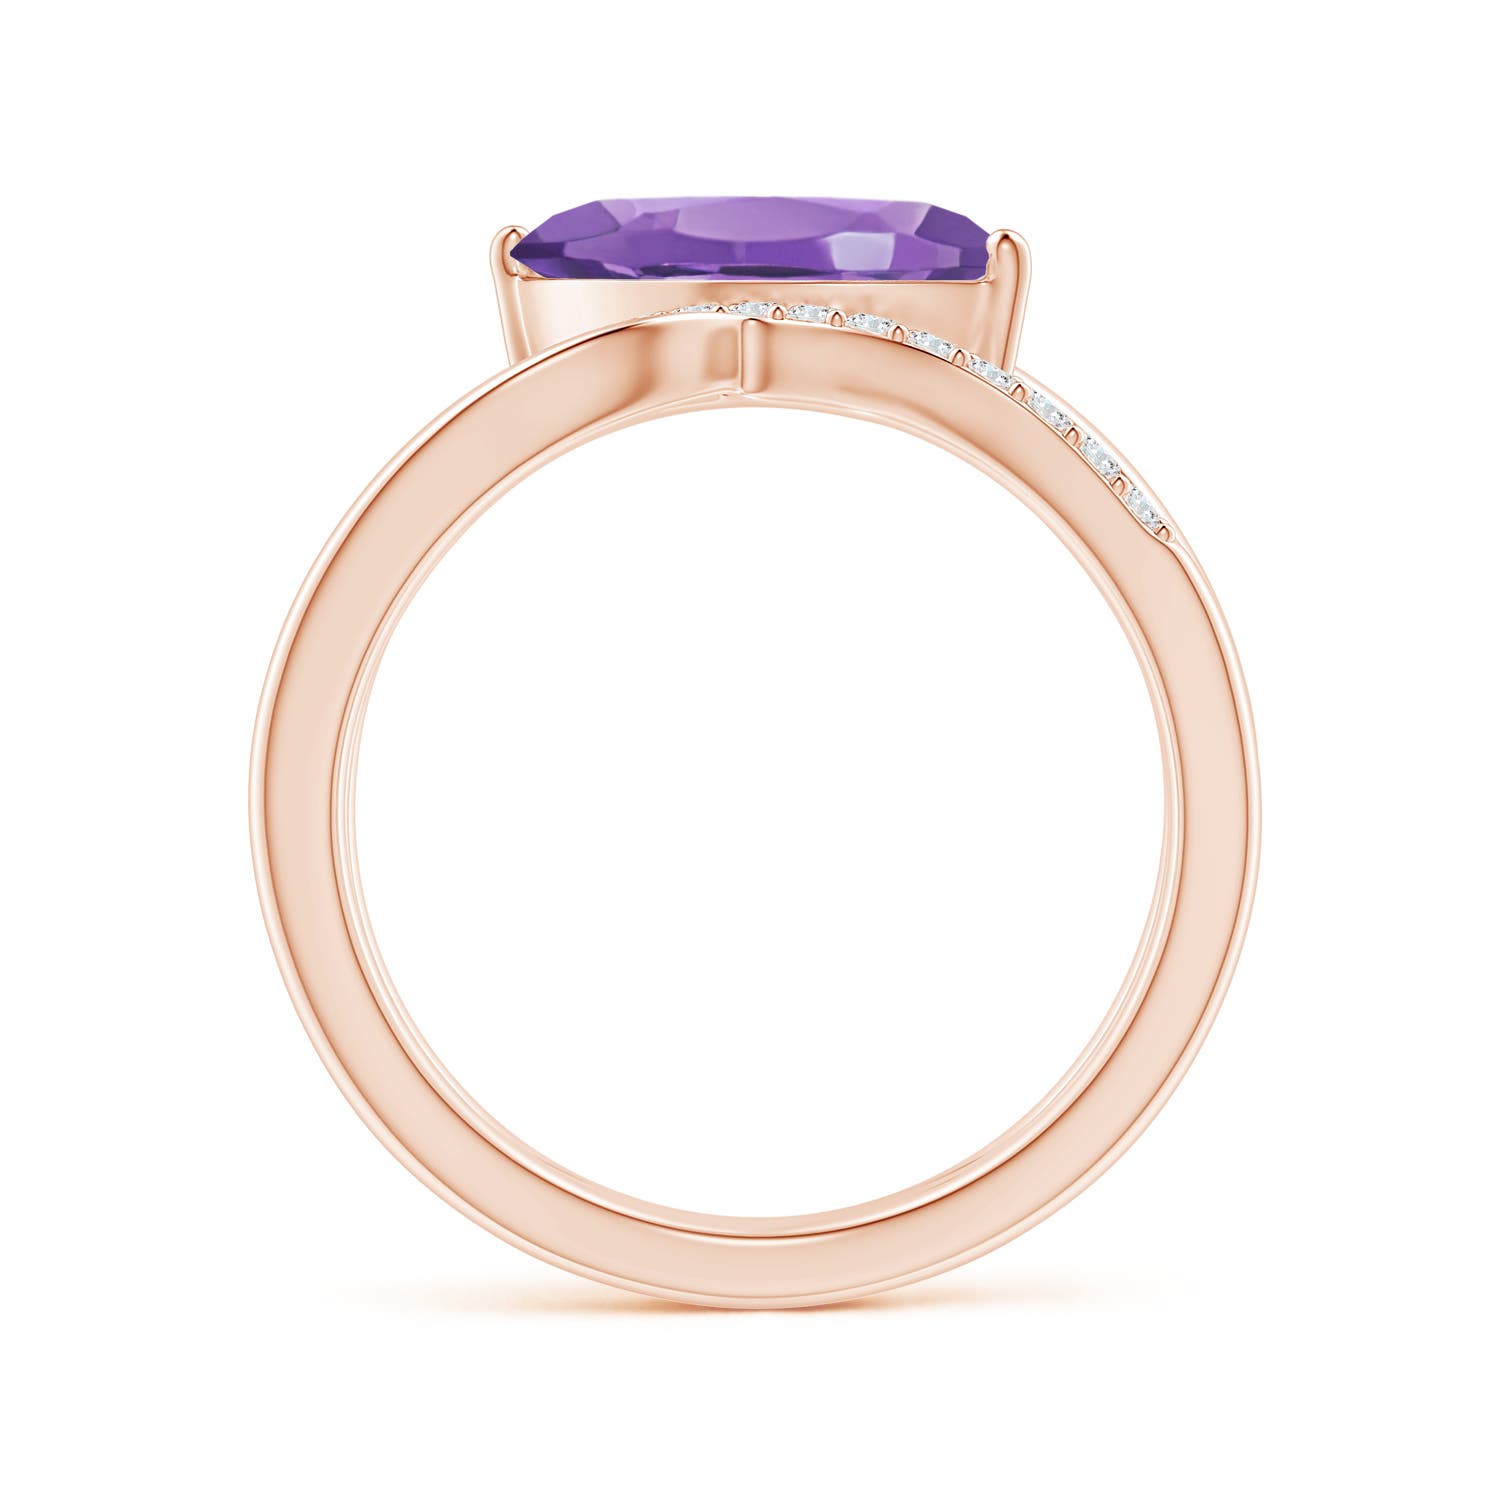 AA - Amethyst / 1.54 CT / 14 KT Rose Gold